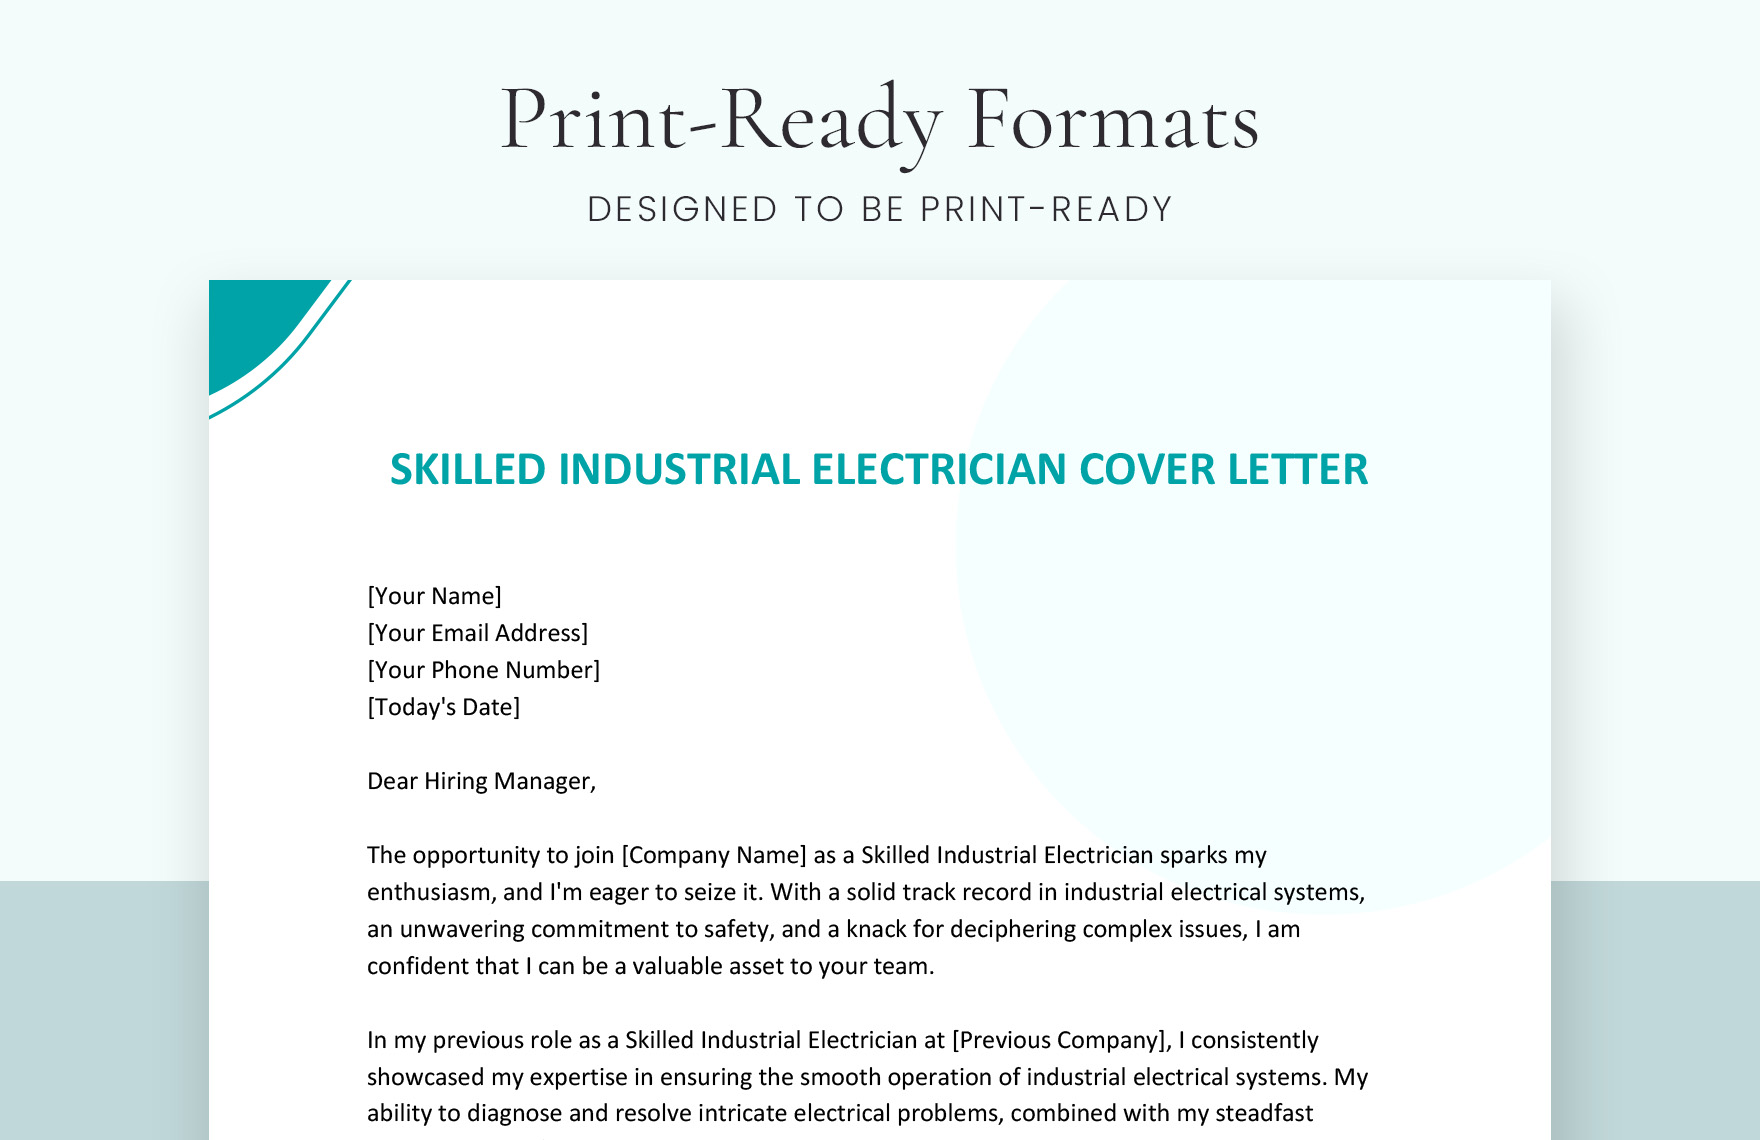 Skilled Industrial Electrician Cover Letter